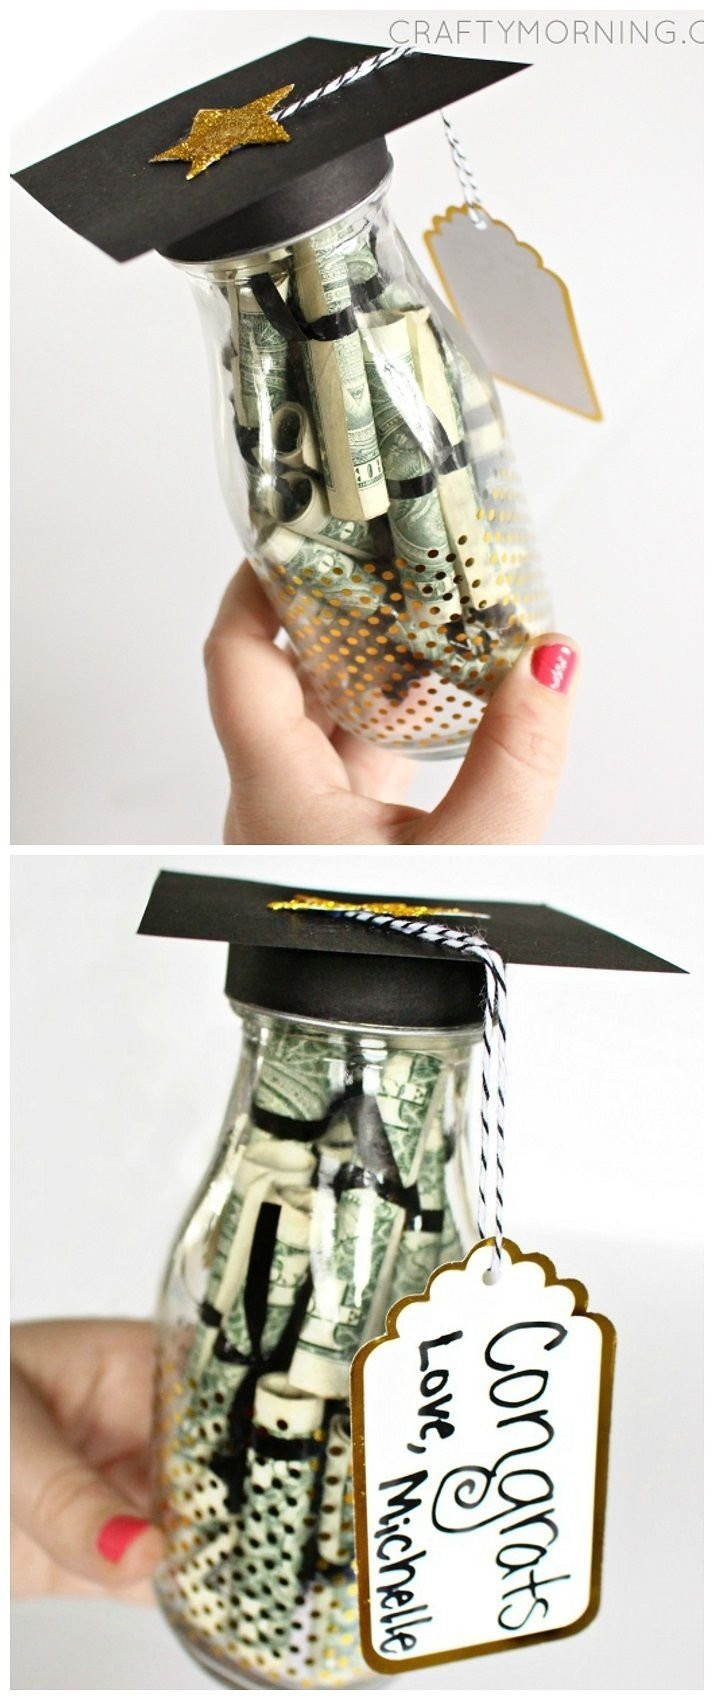 Personalized College Graduation Gift Ideas
 10 Ideal Graduation Gift Ideas For High School Seniors 2019